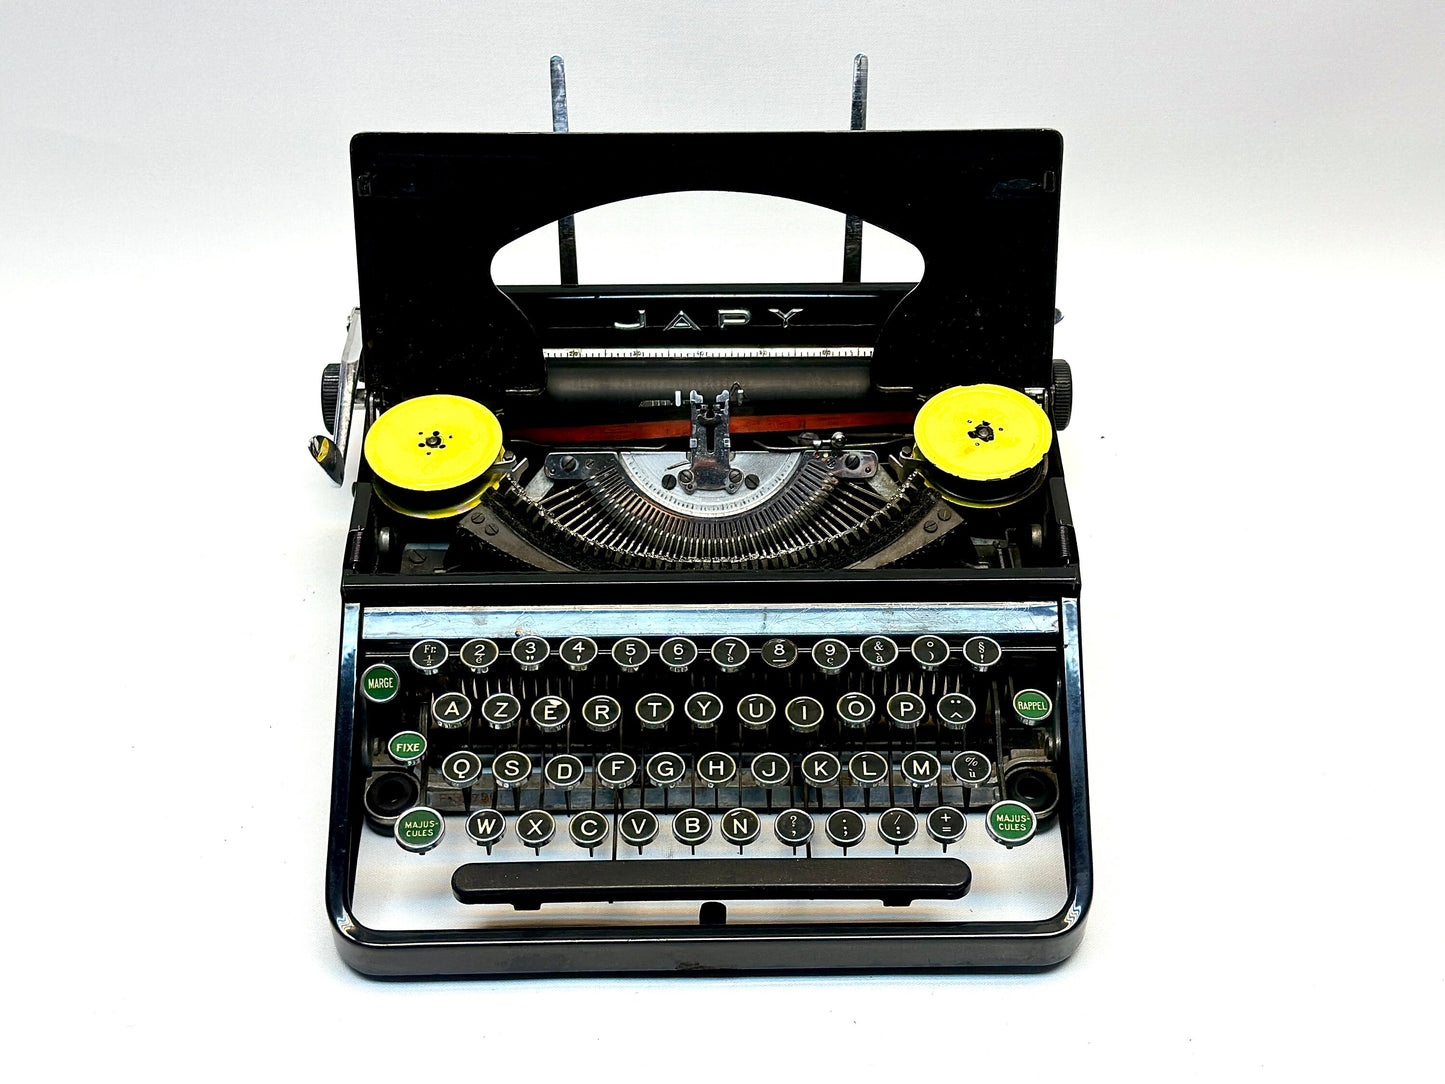 Japy Typewriter - Classic Black Model from 1940 with AZERTY Glass Keyboard